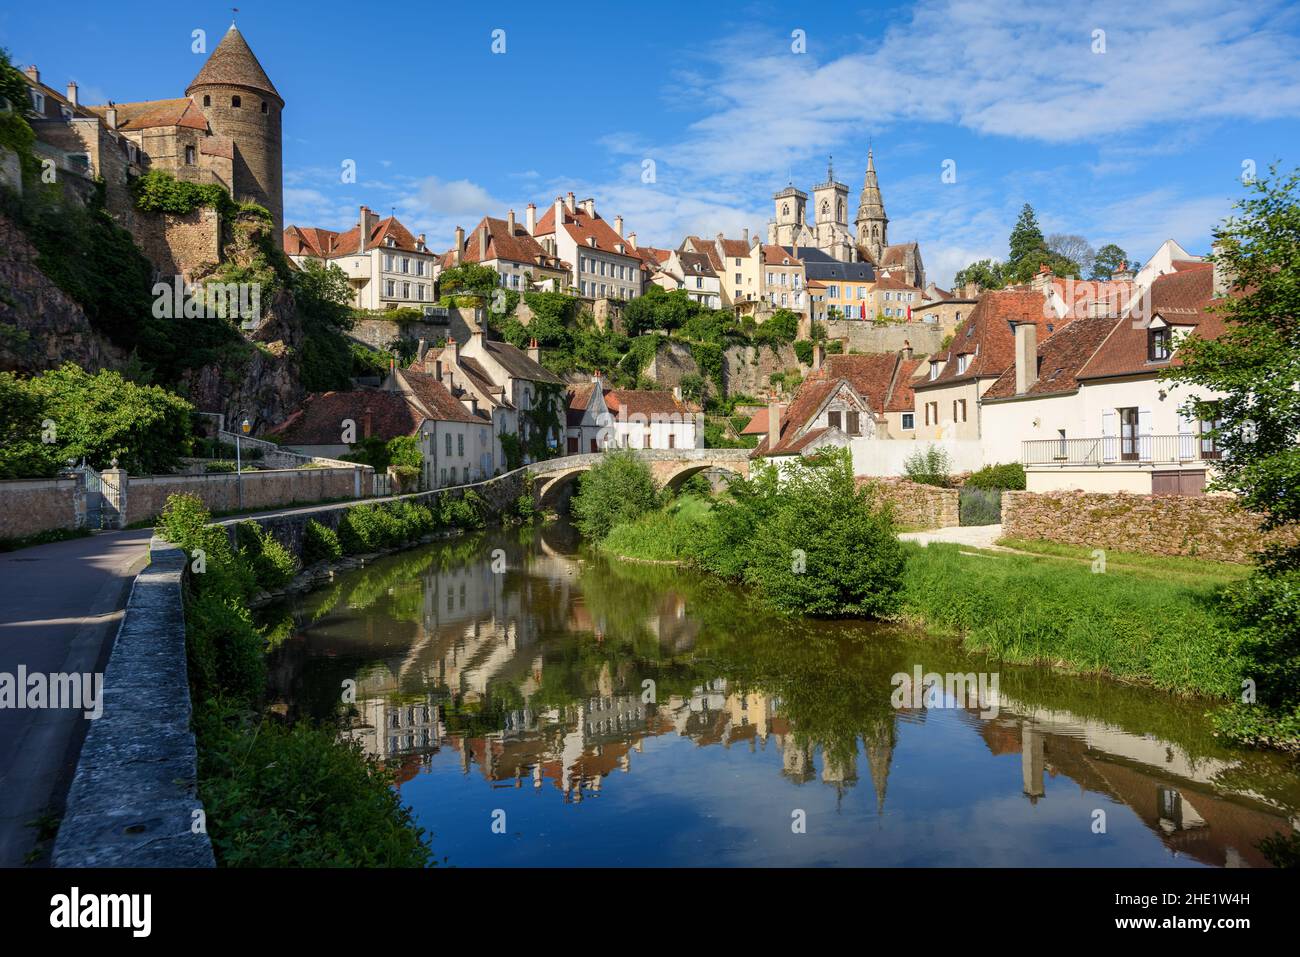 Historical Old town of medieval city of Semur en Auxois reflecting in Armancon river, Cote d'Or, Burgundy, France Stock Photo